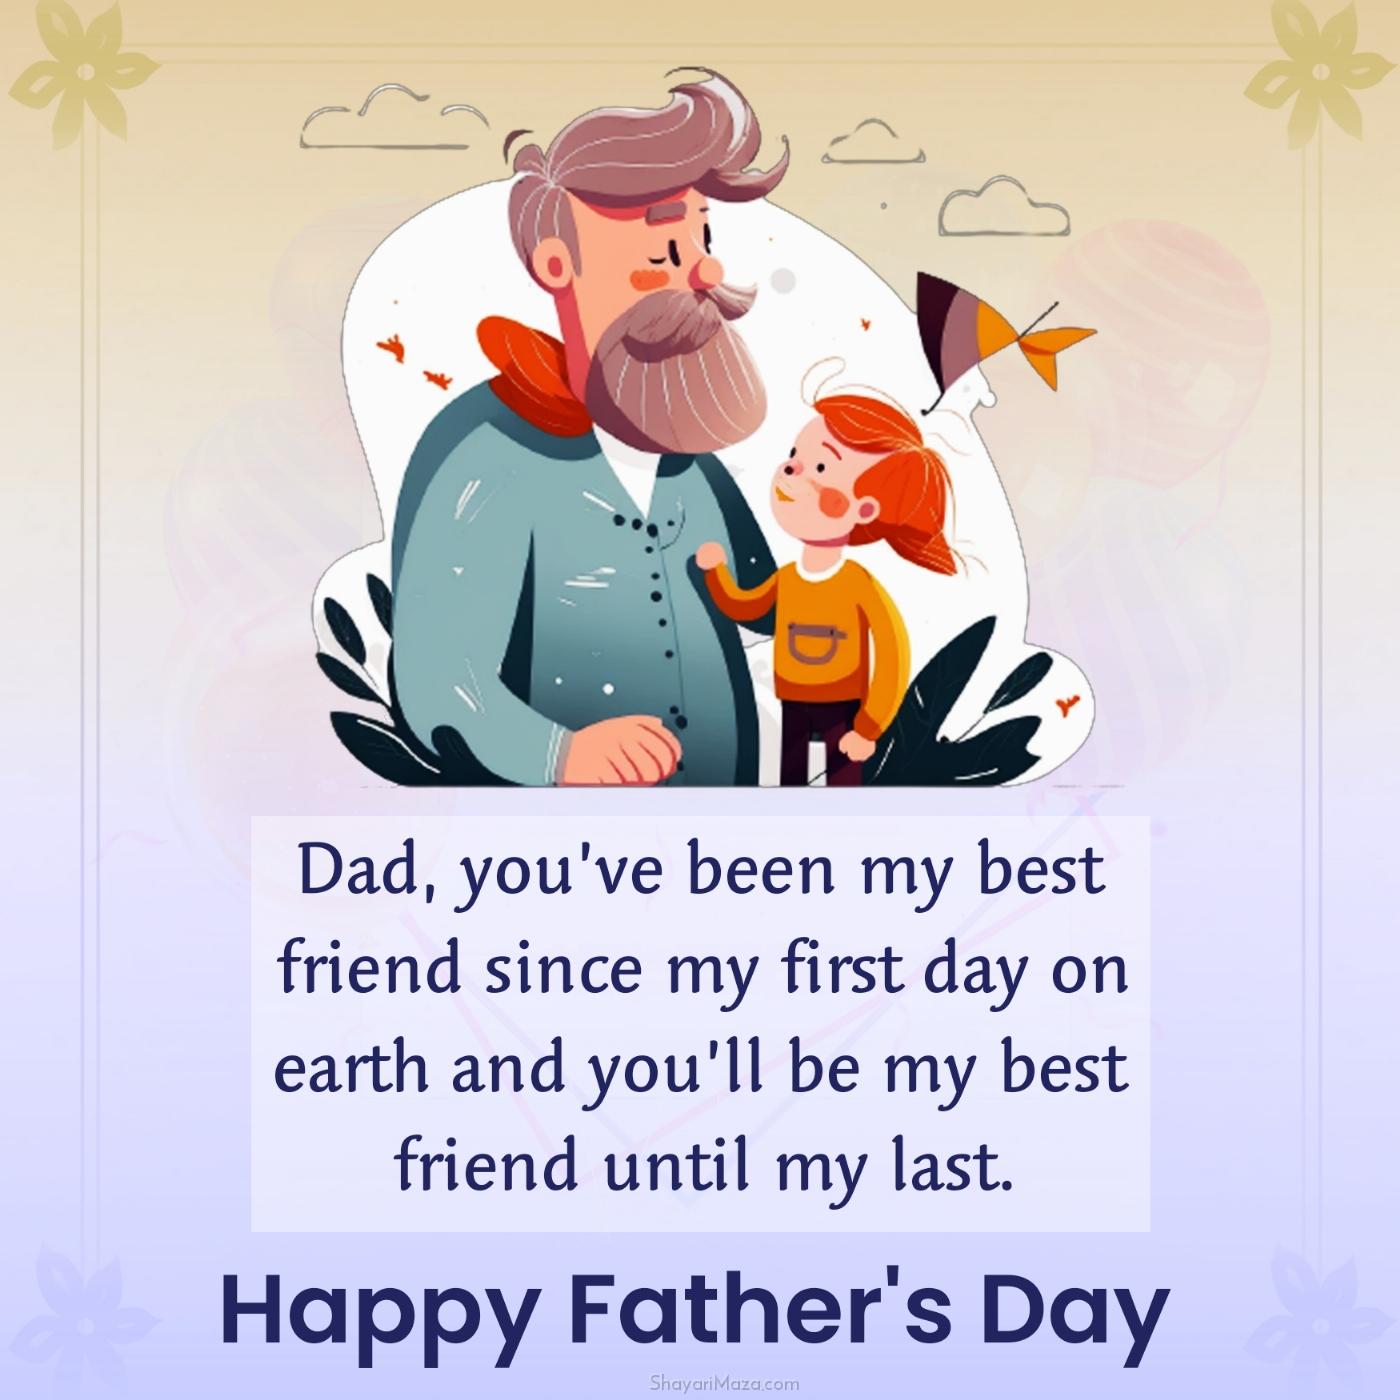 Dad youve been my best friend since my first day